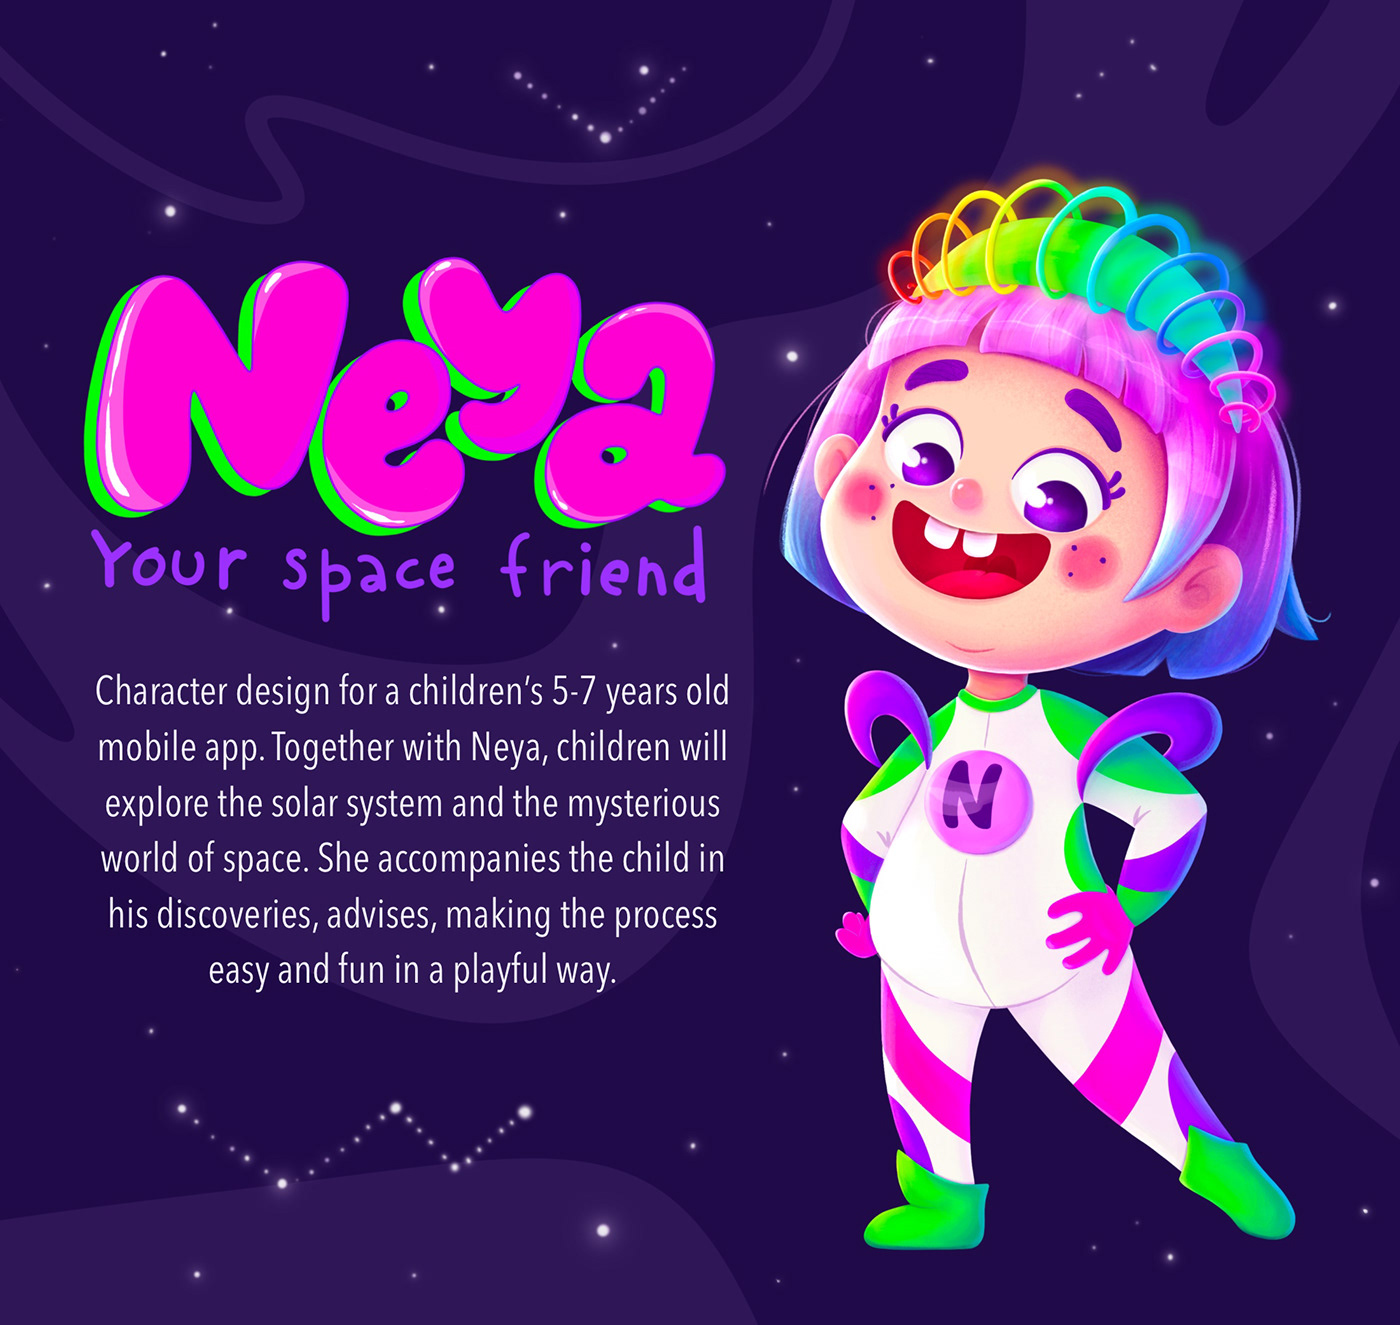 Character design for a children's 5-7 years old mobile app. Intergalactic girl in a neon costume.